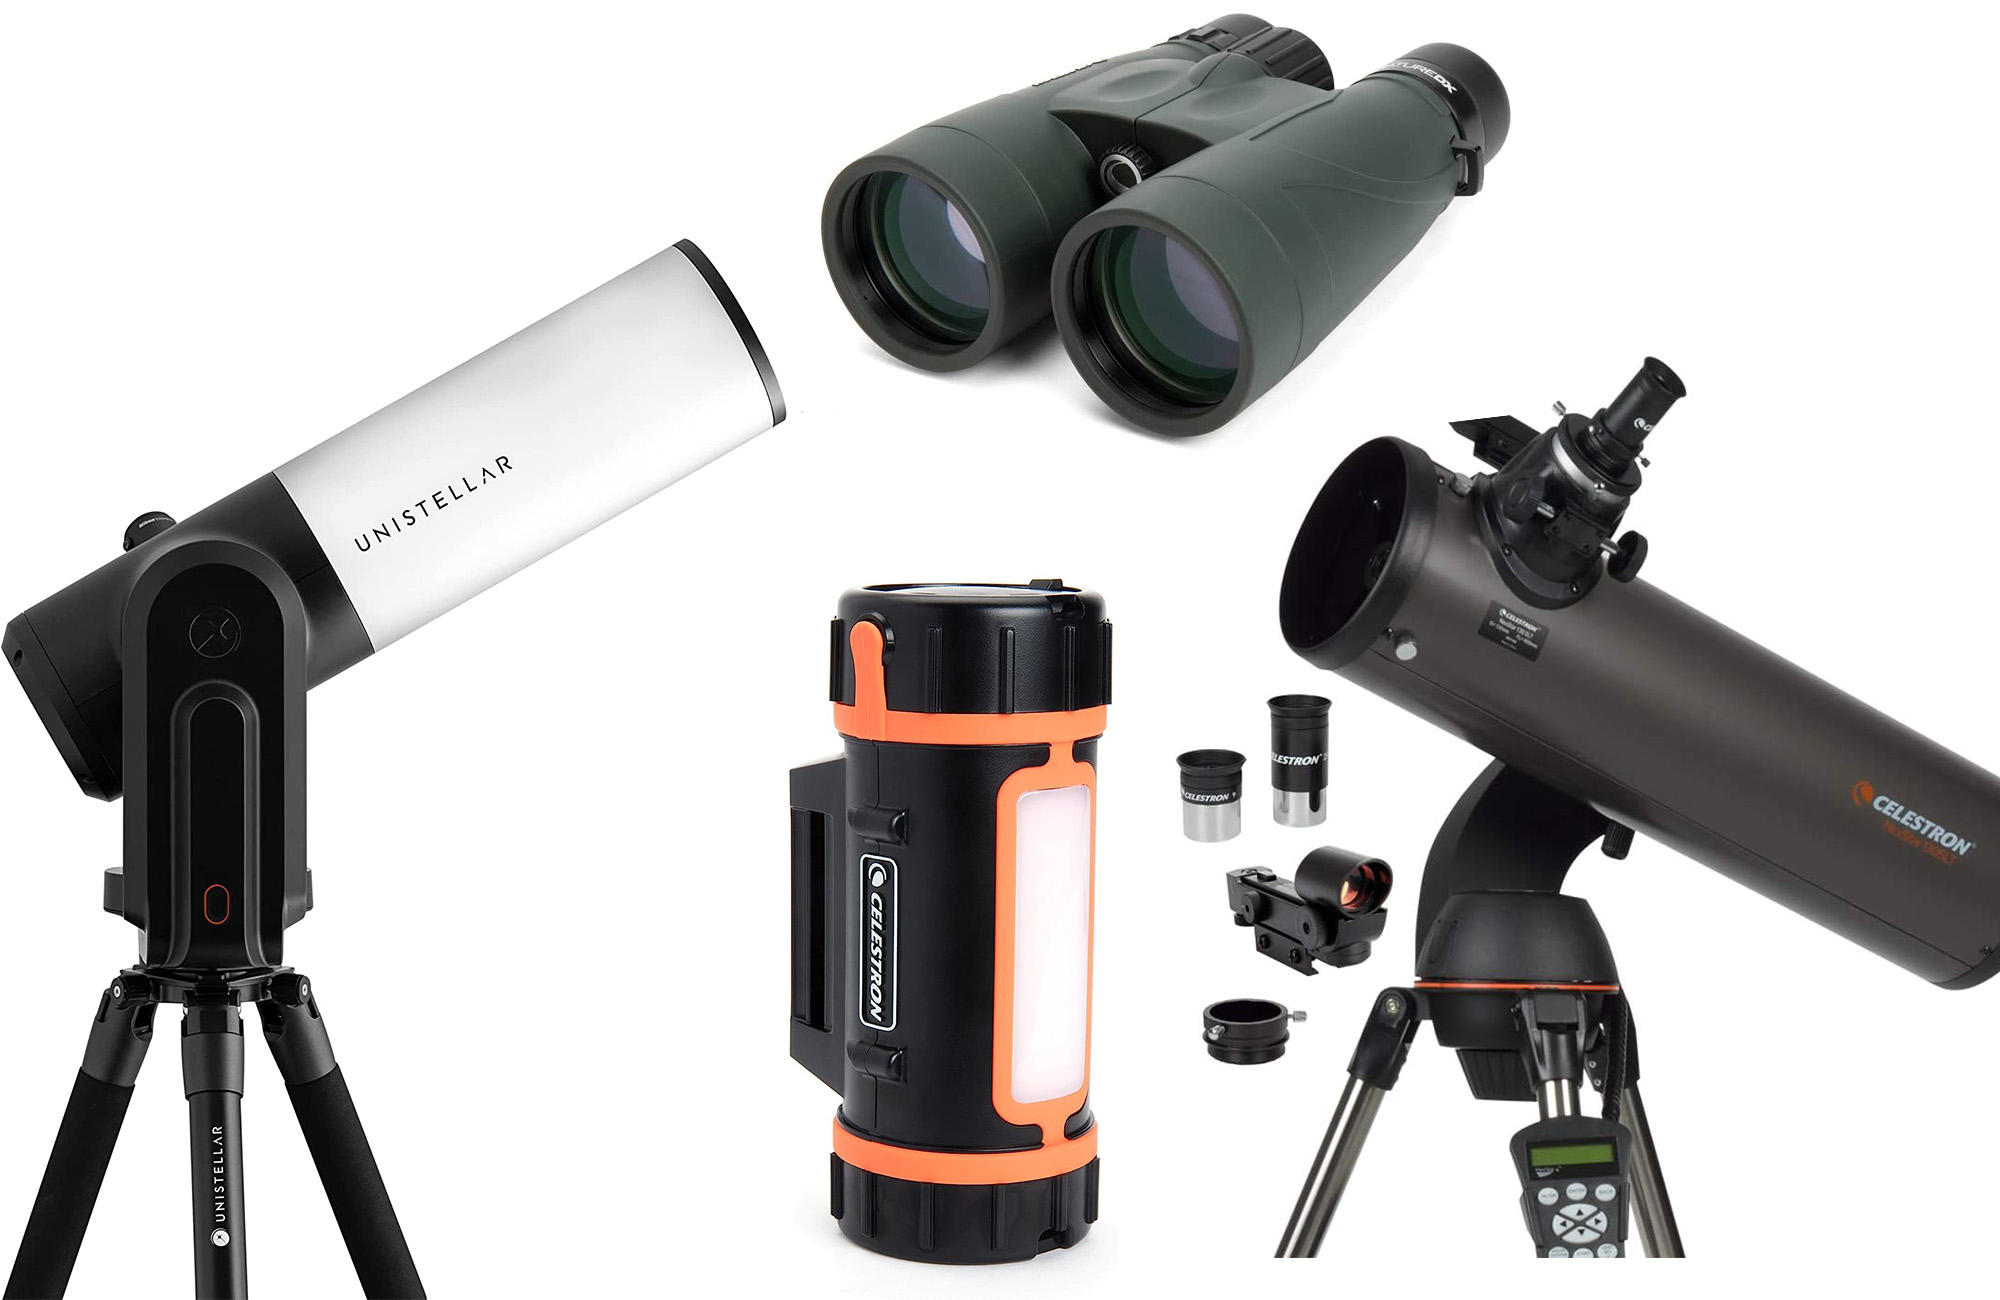 Don’t miss out on saving $200 on Celestron telescopes and binoculars with these last-minute Prime Day deals